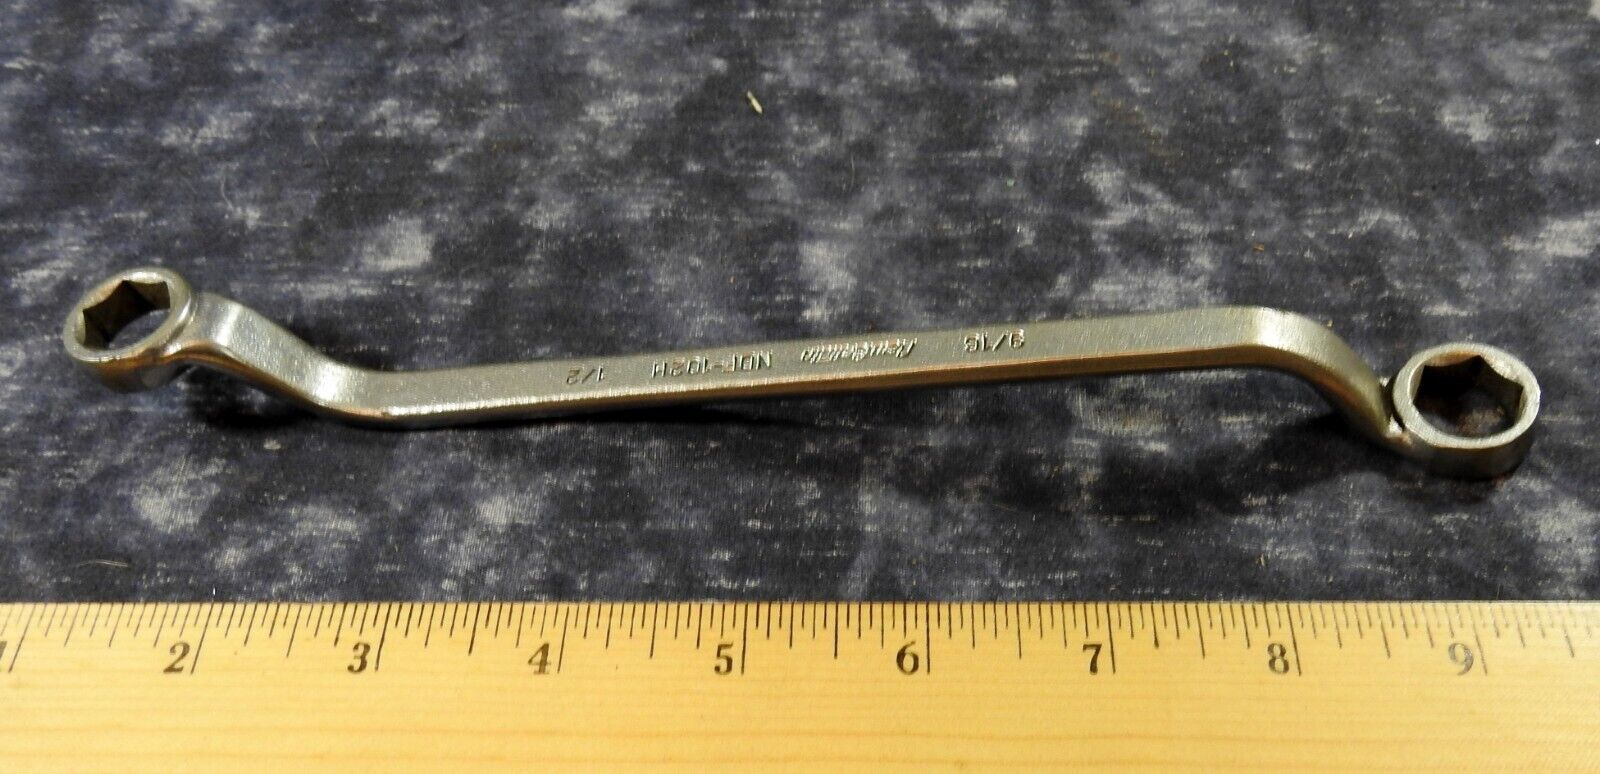 New Britain Tools USA 1/2 x 9/16 Offset Box End Wrench 6-pt NDF-102H Vintage